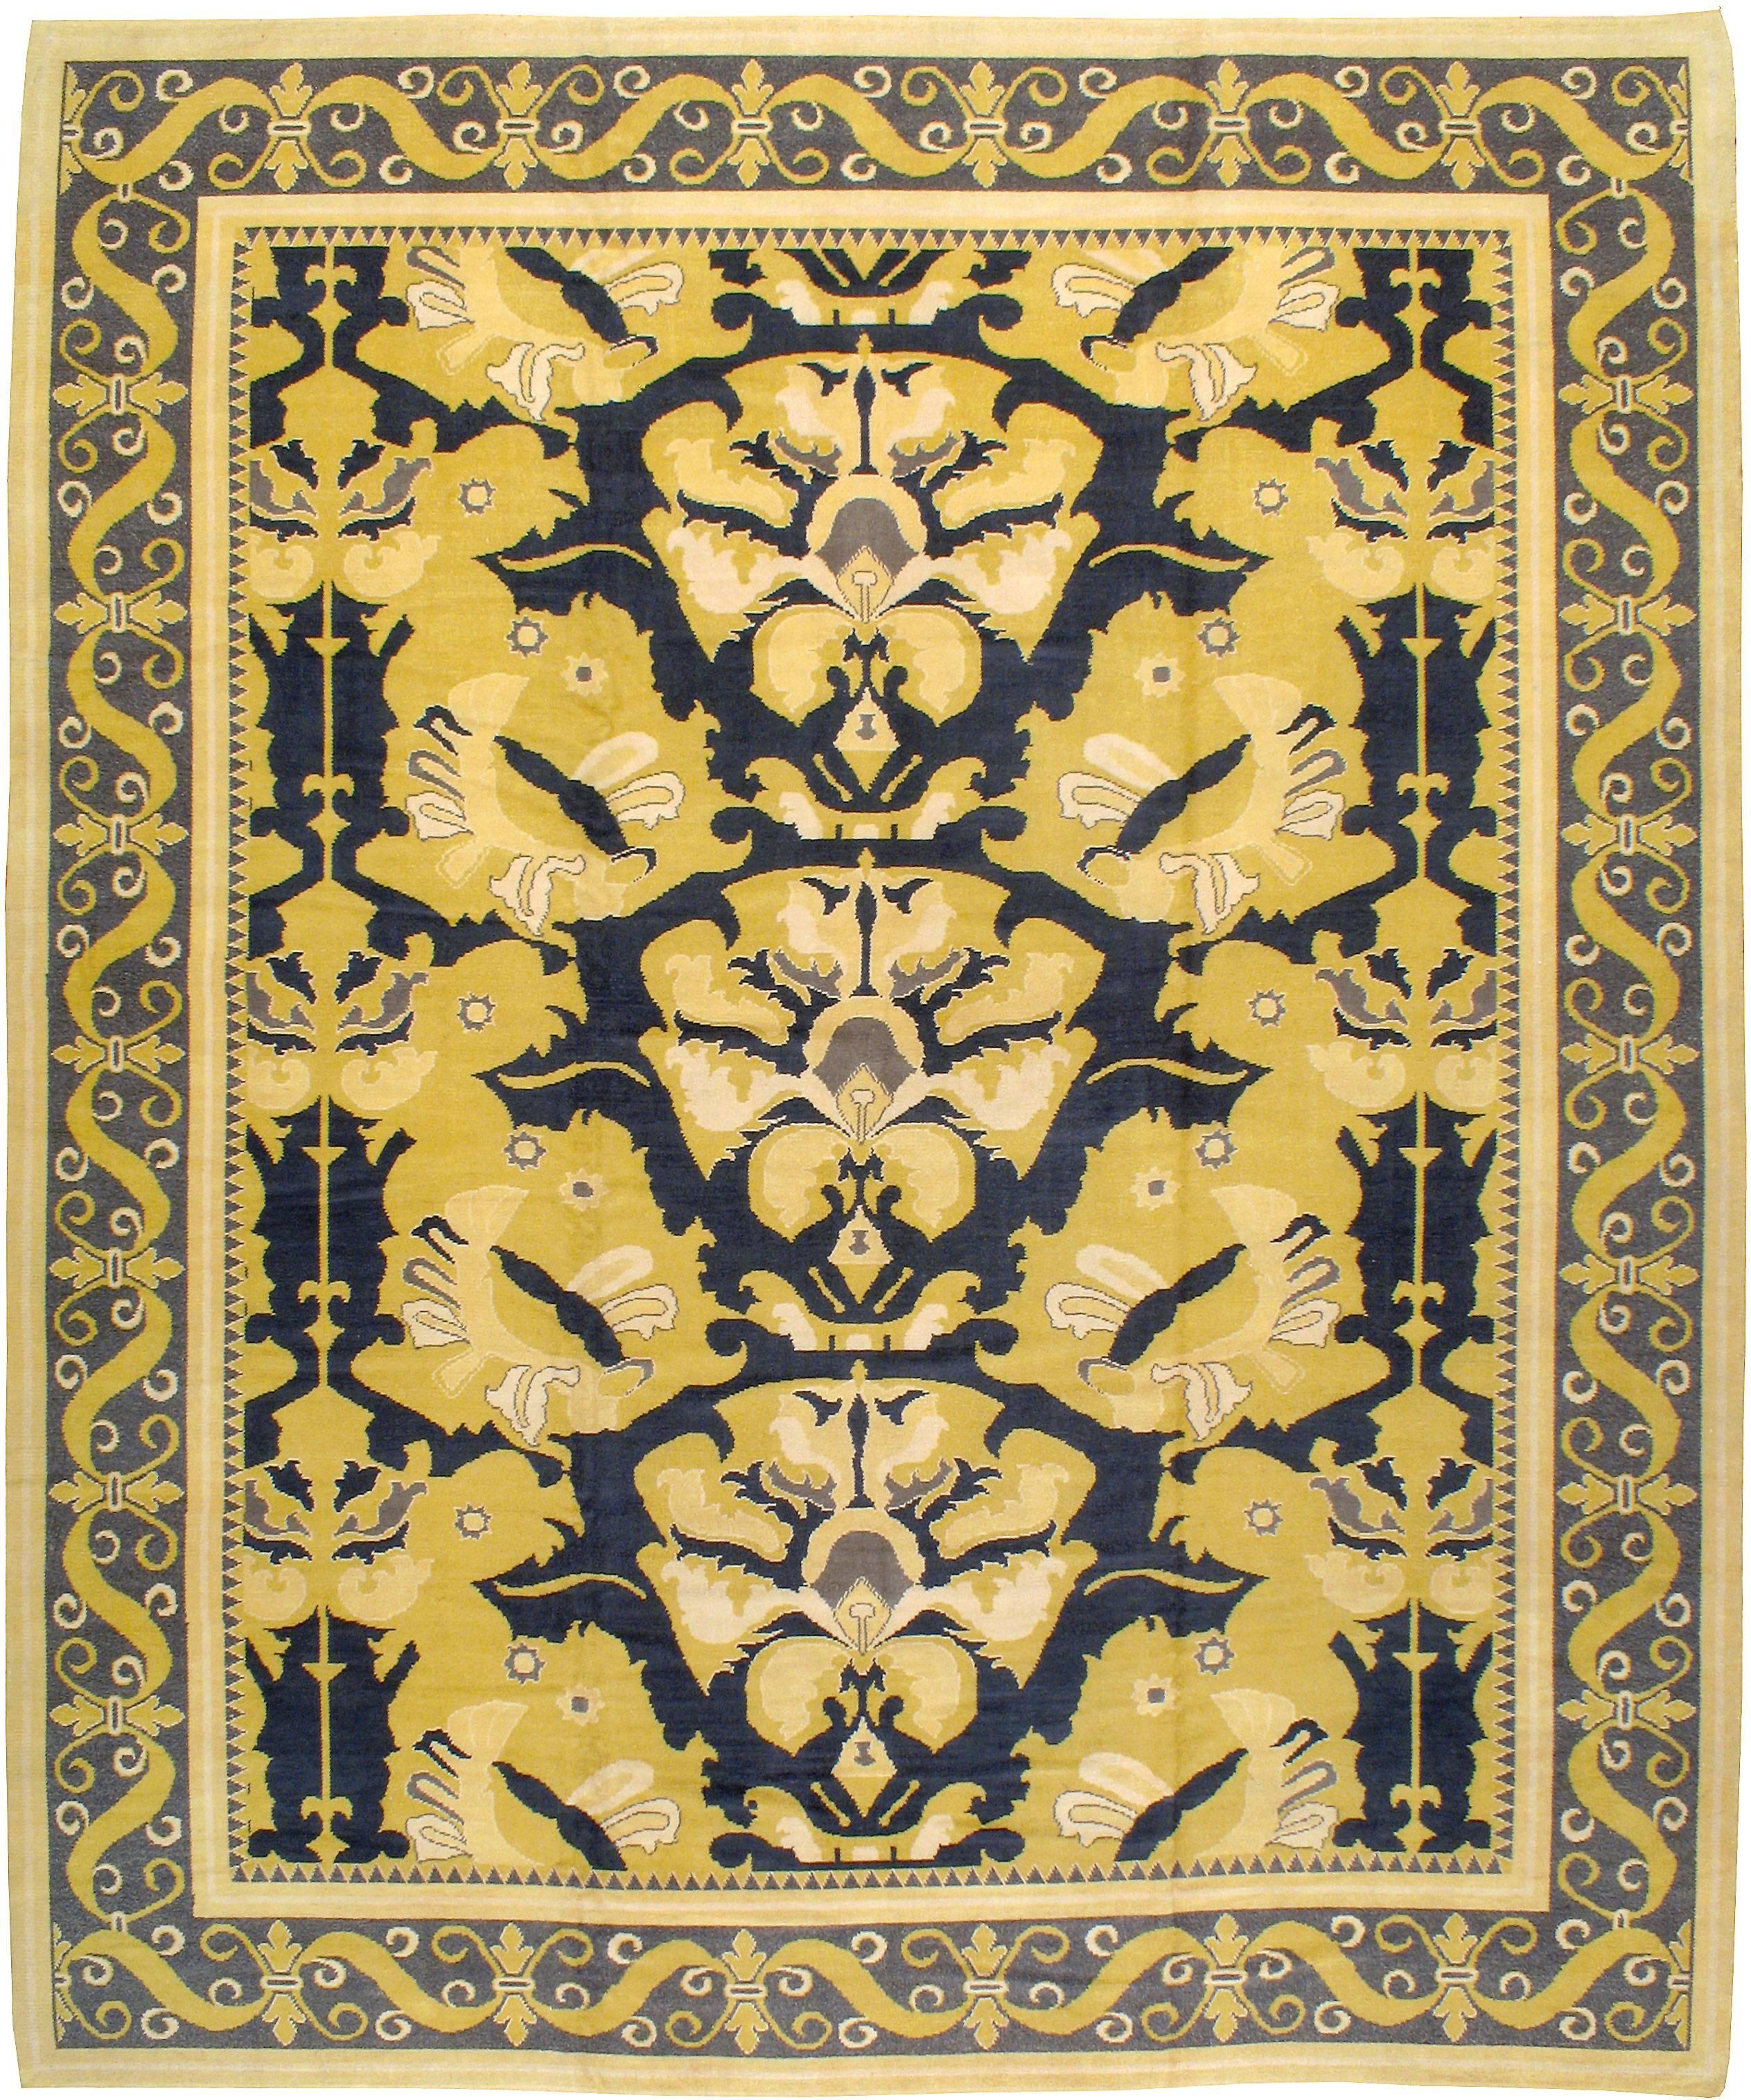 A vintage Spanish Cuenca carpet, from the mid-20th century, reminiscent of the Arts & Crafts movement and executed in midnight blue and saffron.

Measures: 11' 10